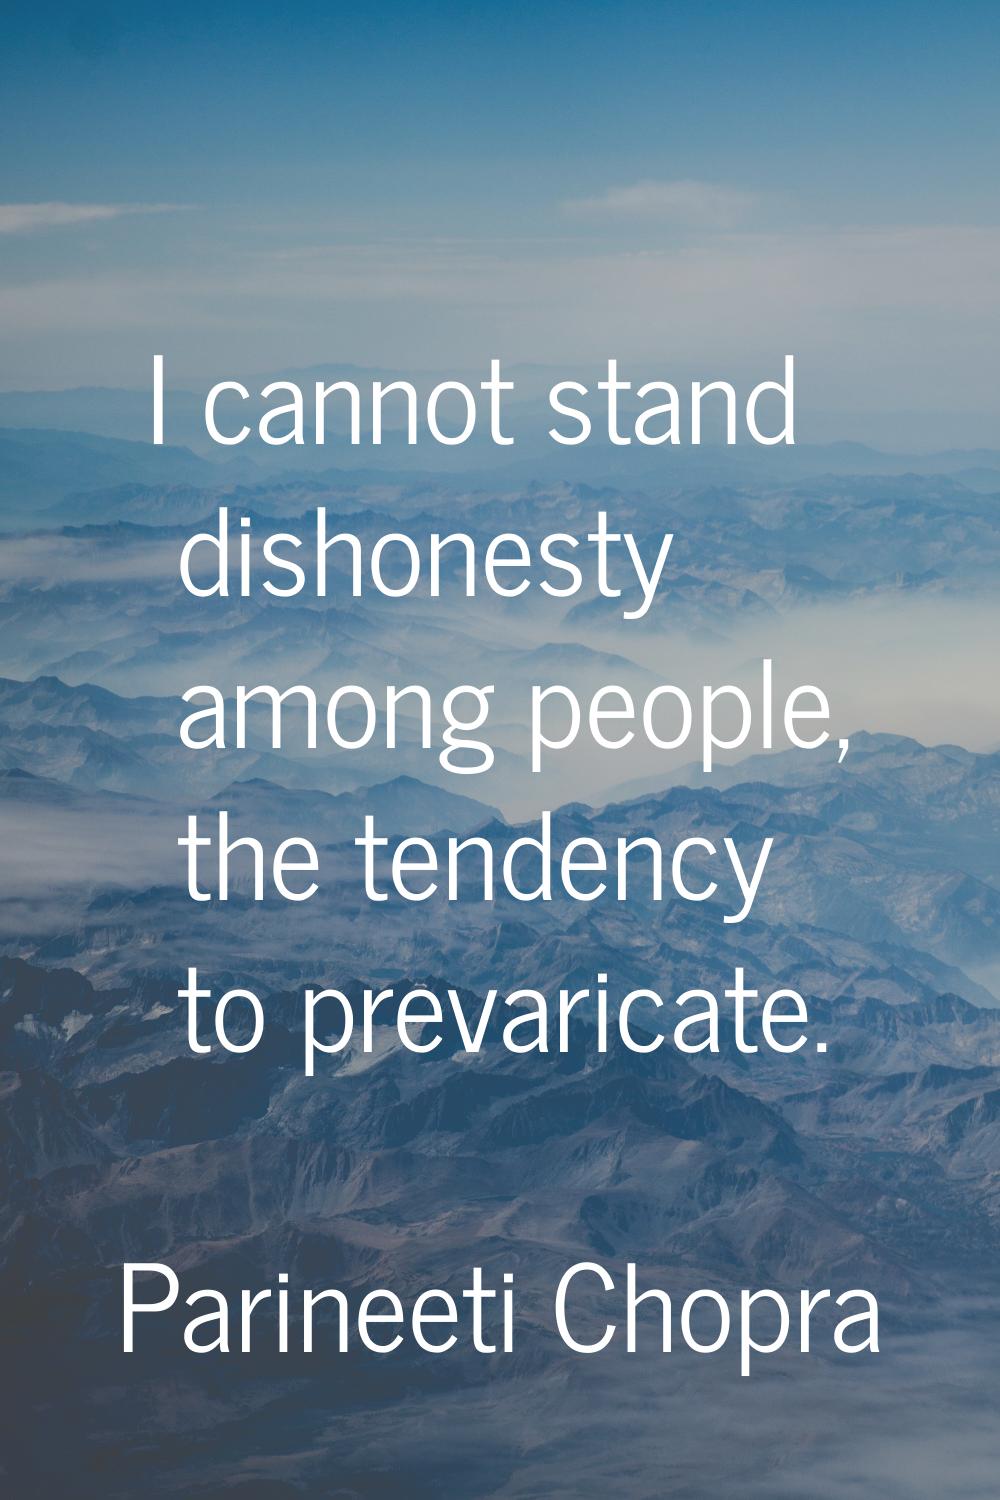 I cannot stand dishonesty among people, the tendency to prevaricate.